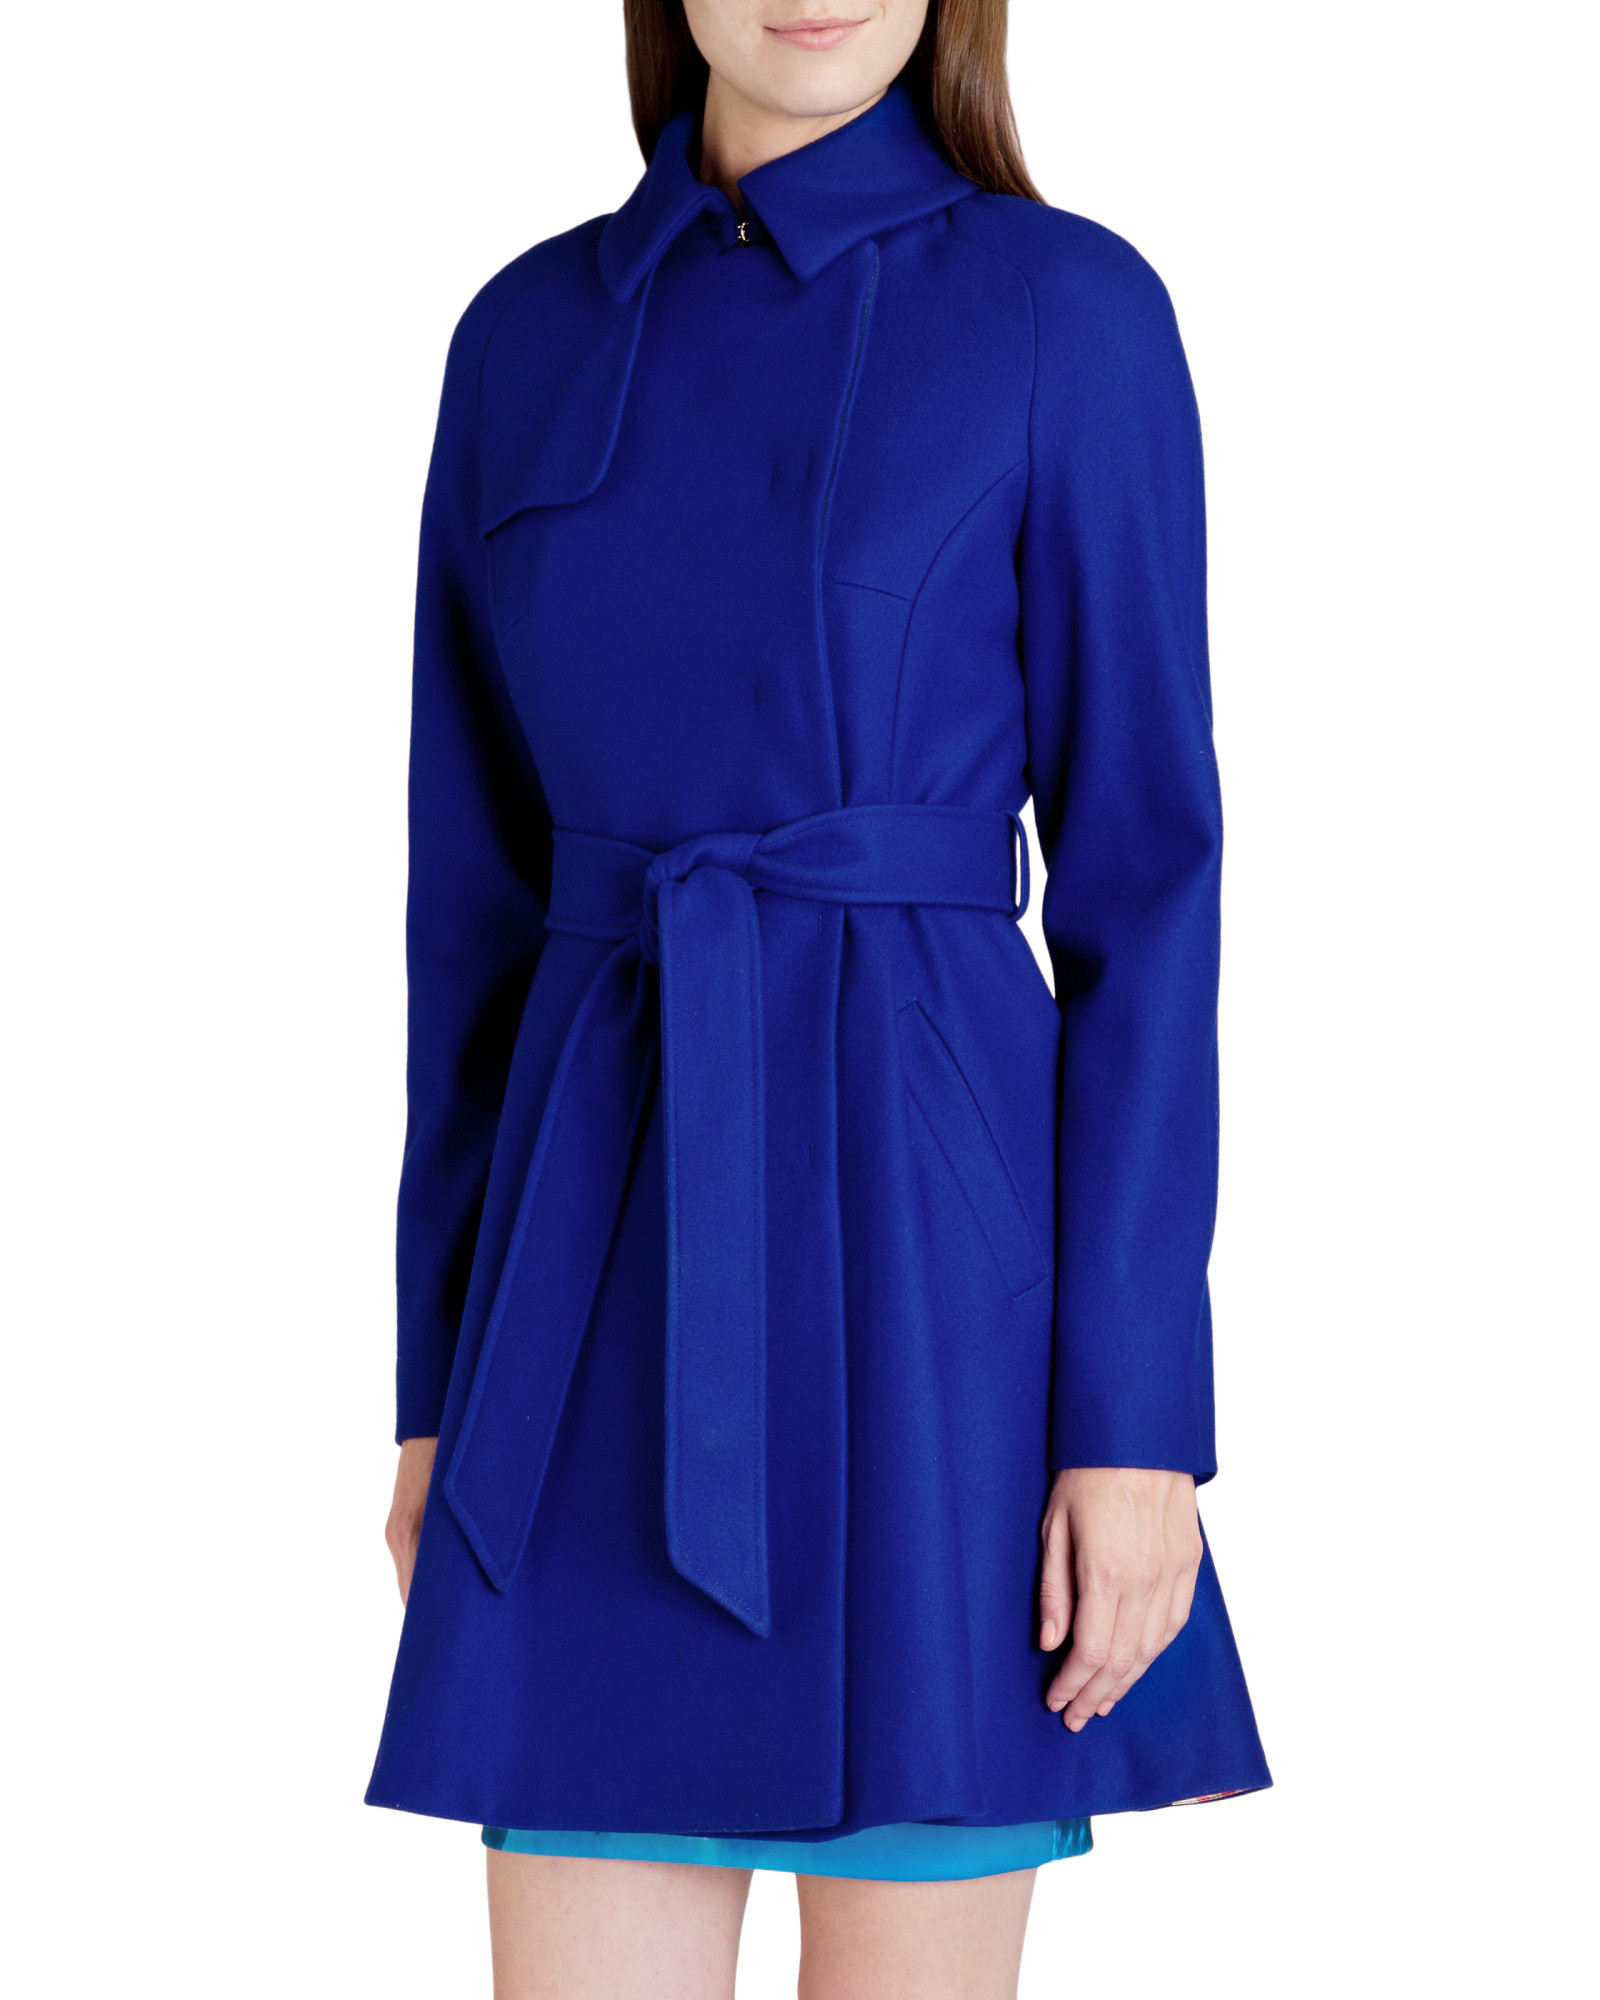 Ted Baker Albine Wool Trench Coat in Bright Blue (Blue) - Lyst